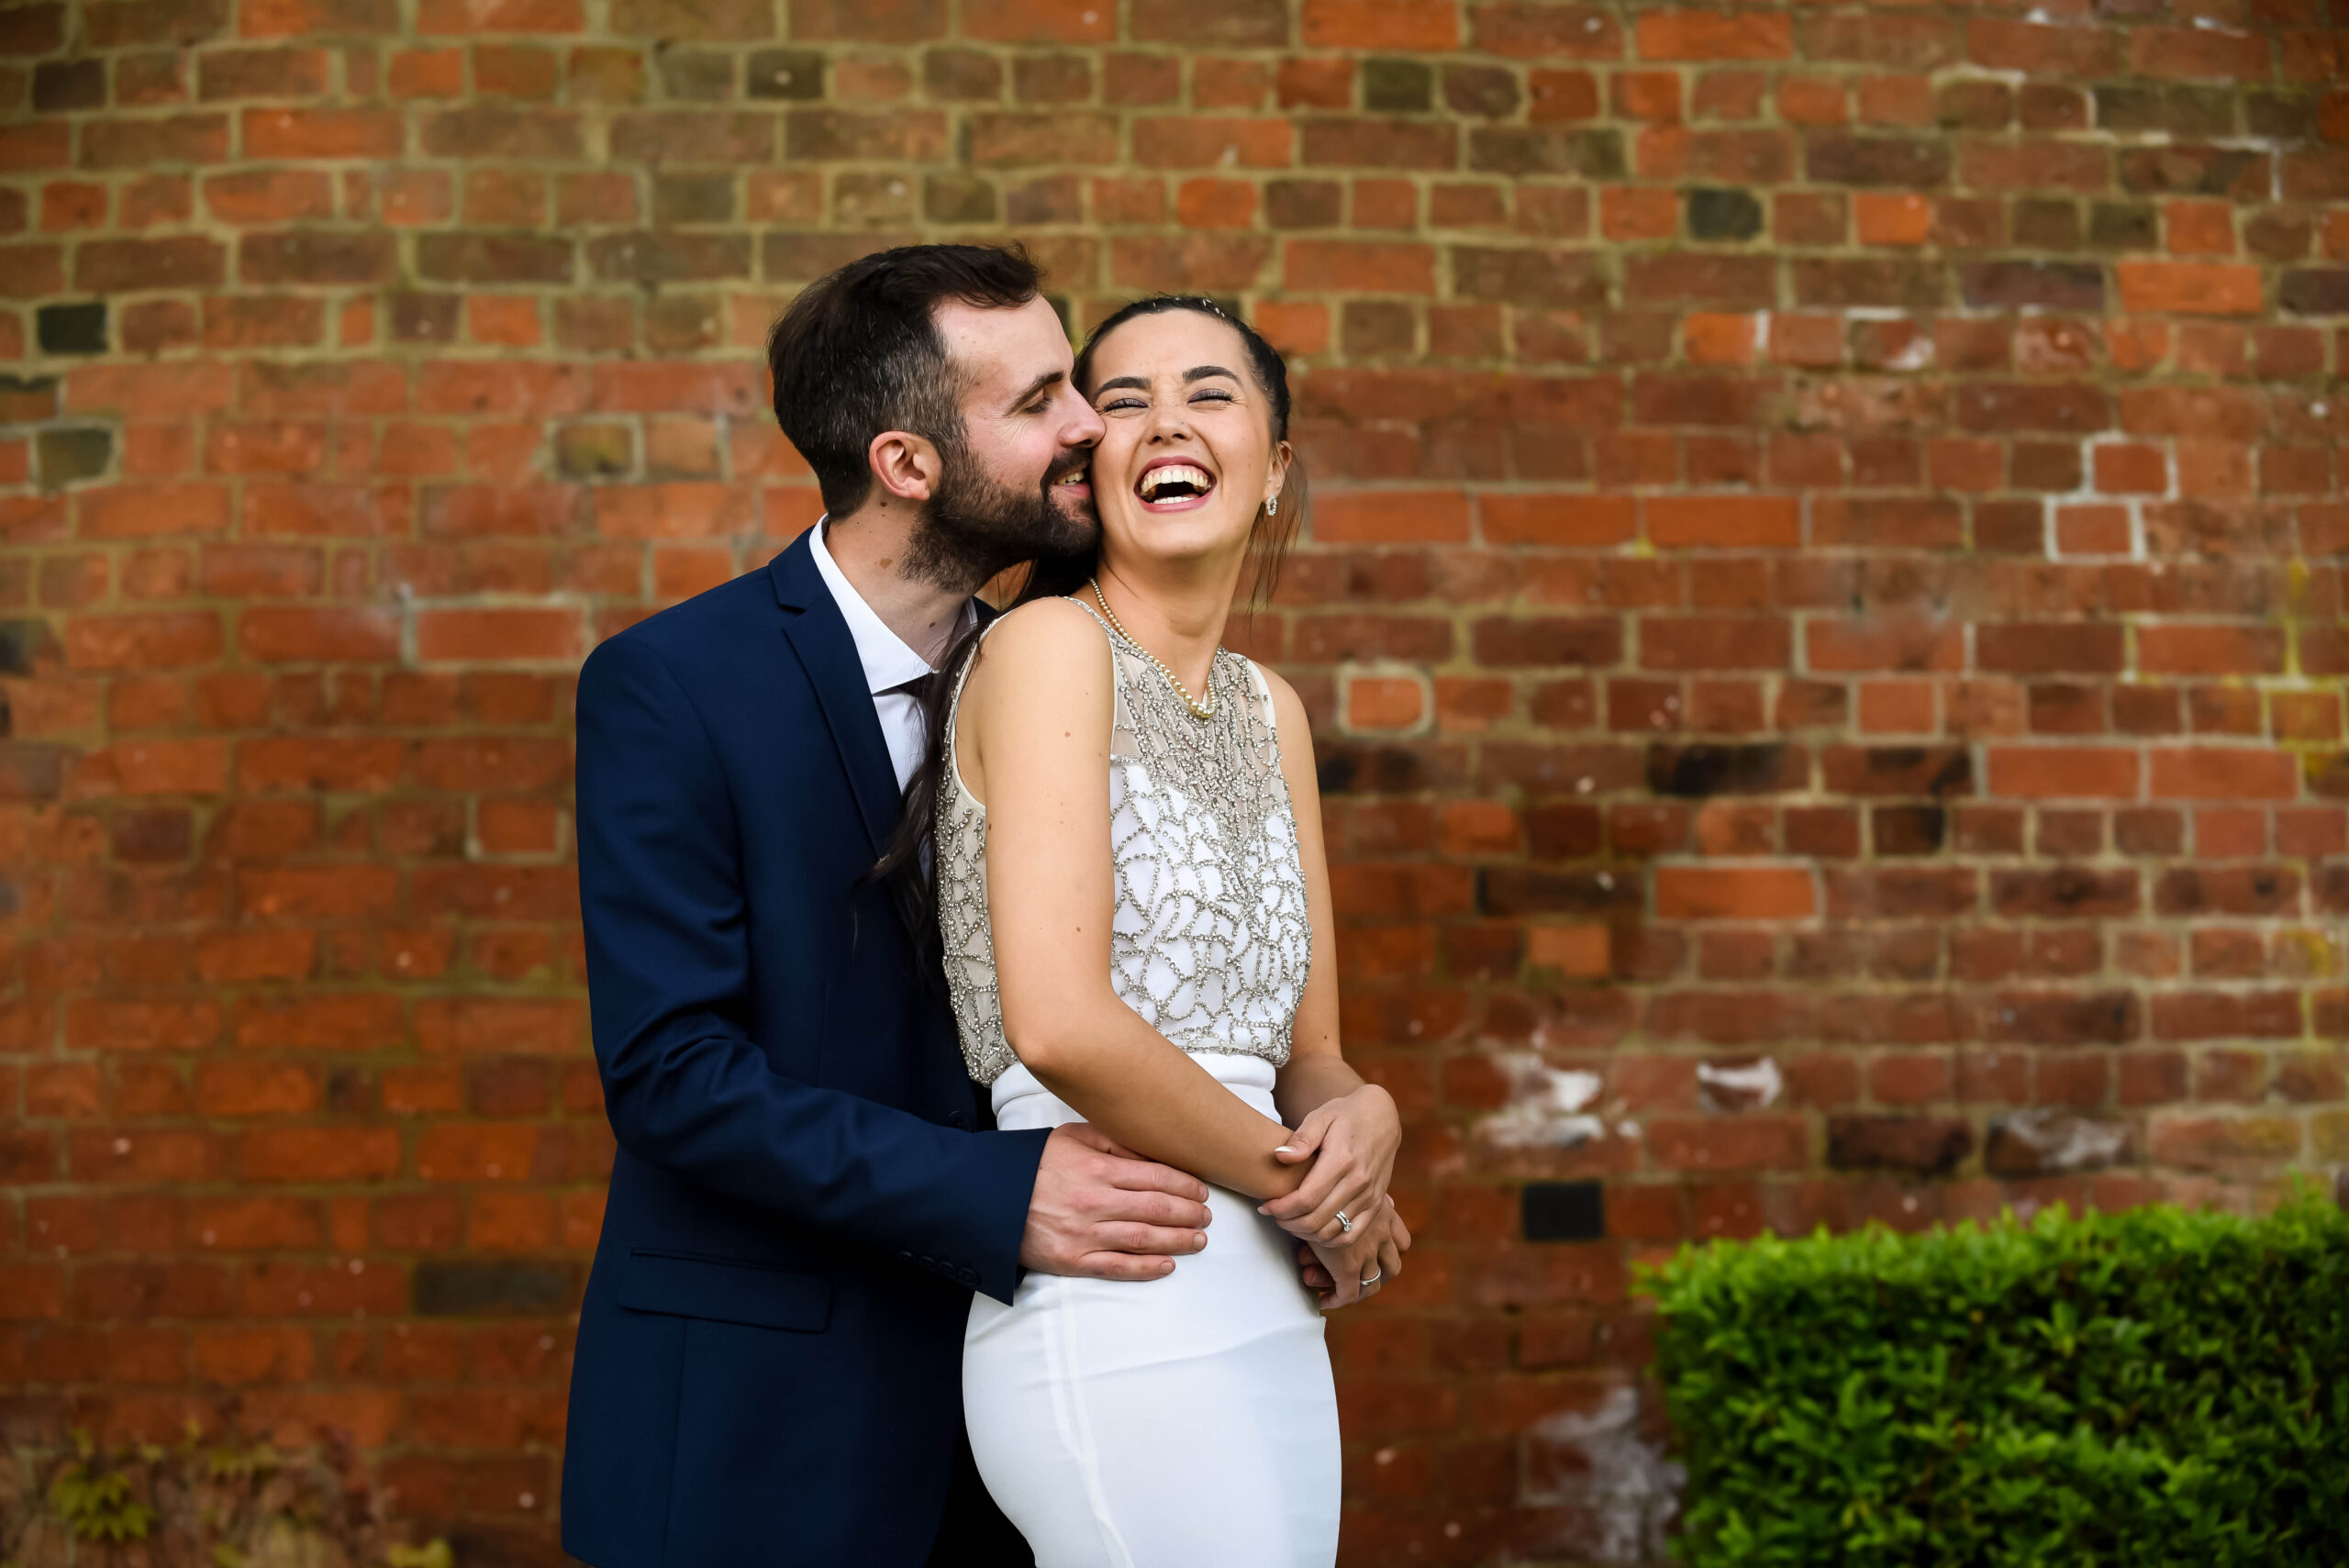 Newlyweds standing together and laughing, by Tori Deslauriers Photography